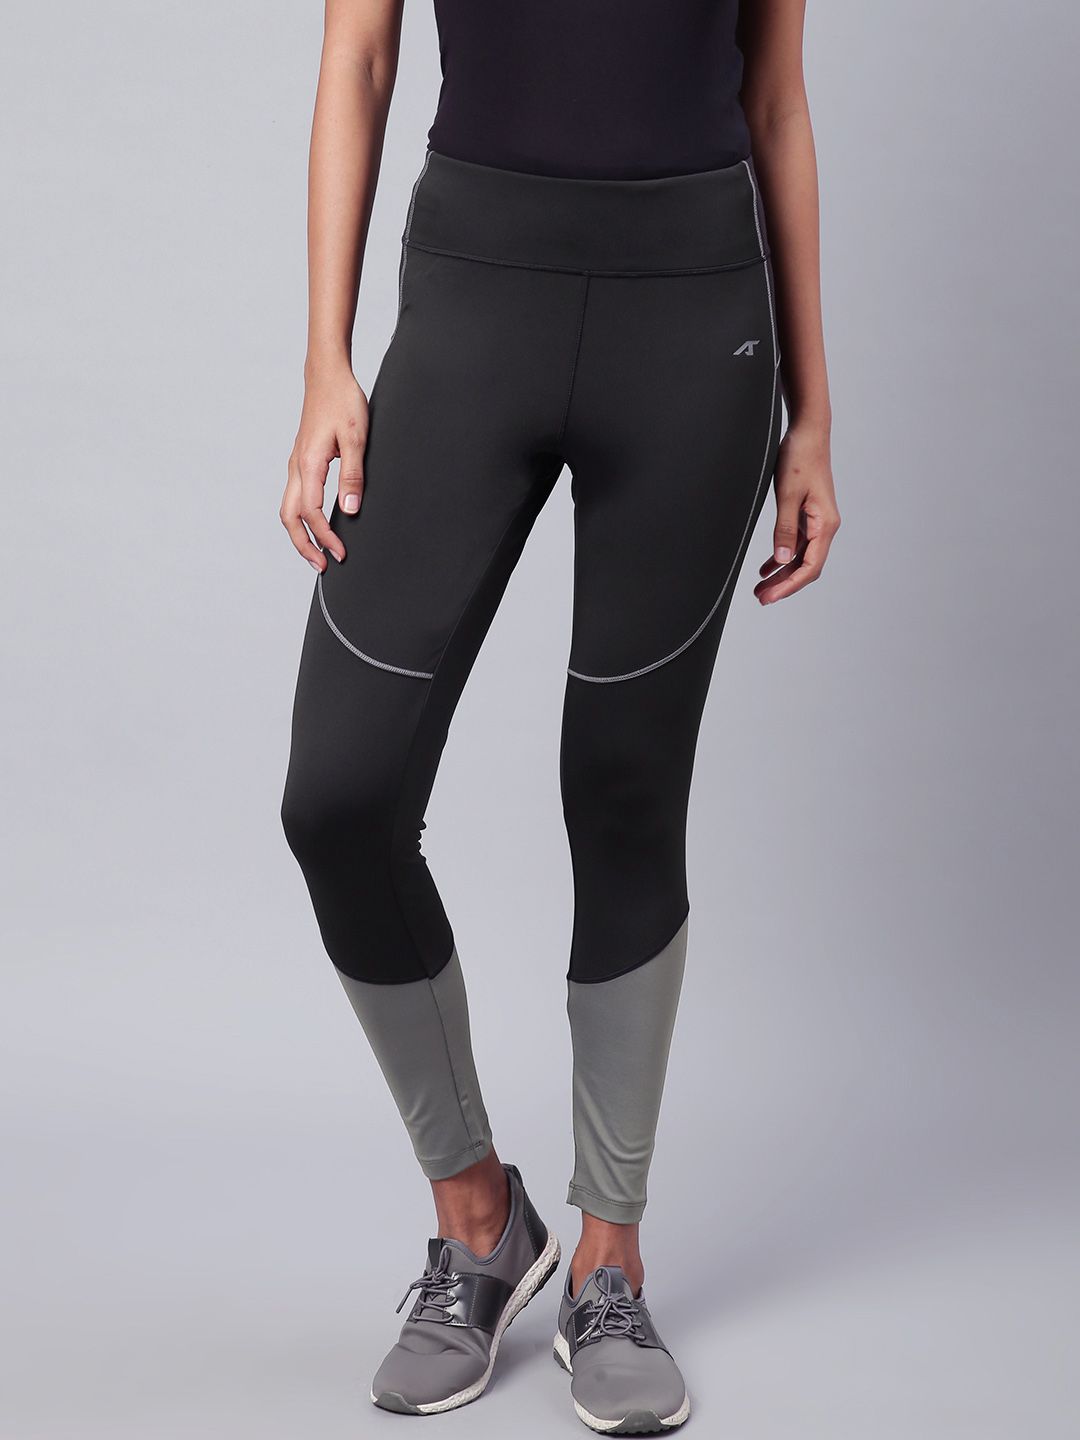 Alcis Women Black & Grey Colourblocked Rapid Dry Solid Cropped Training Tights Price in India